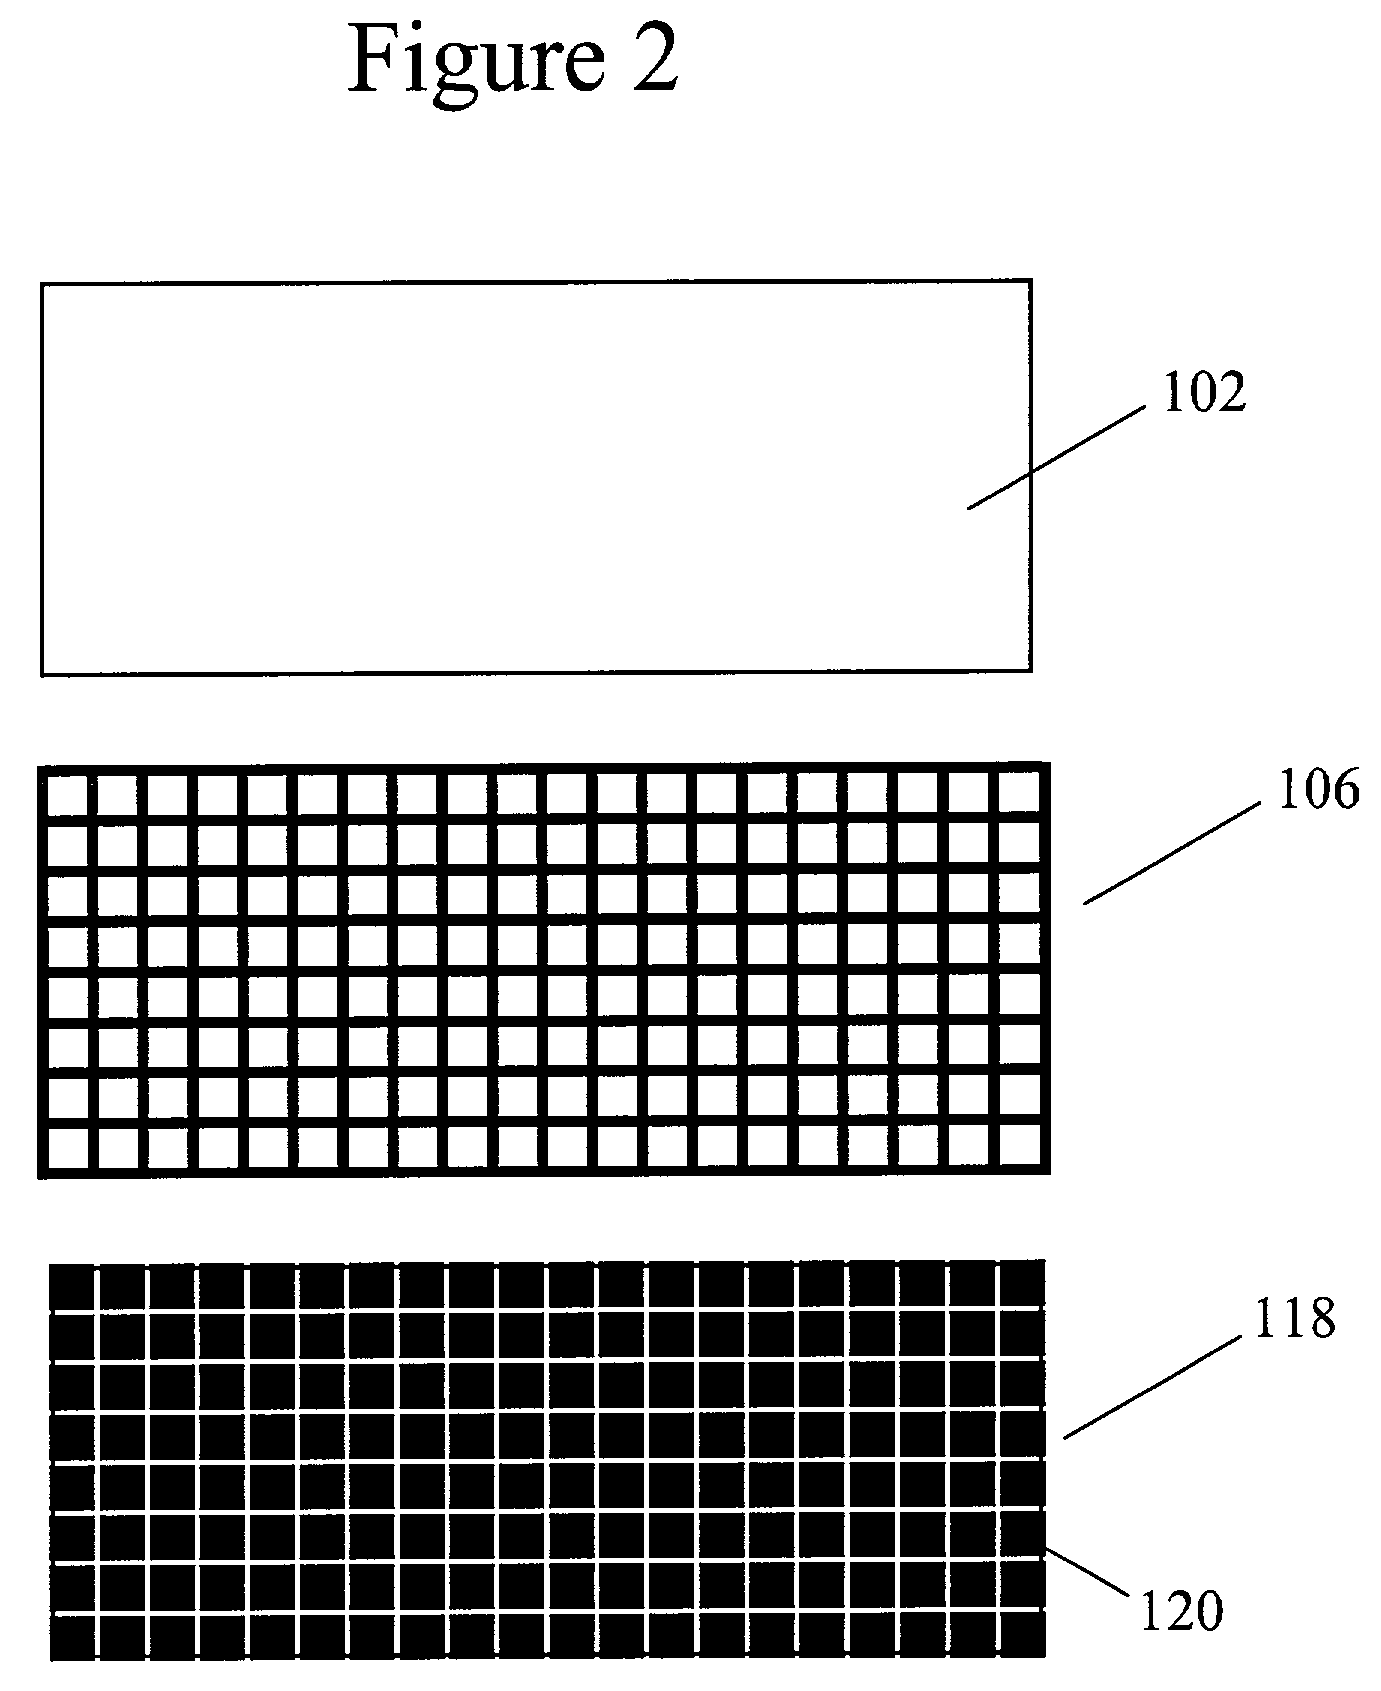 Randomly ordered arrays and methods of making and using